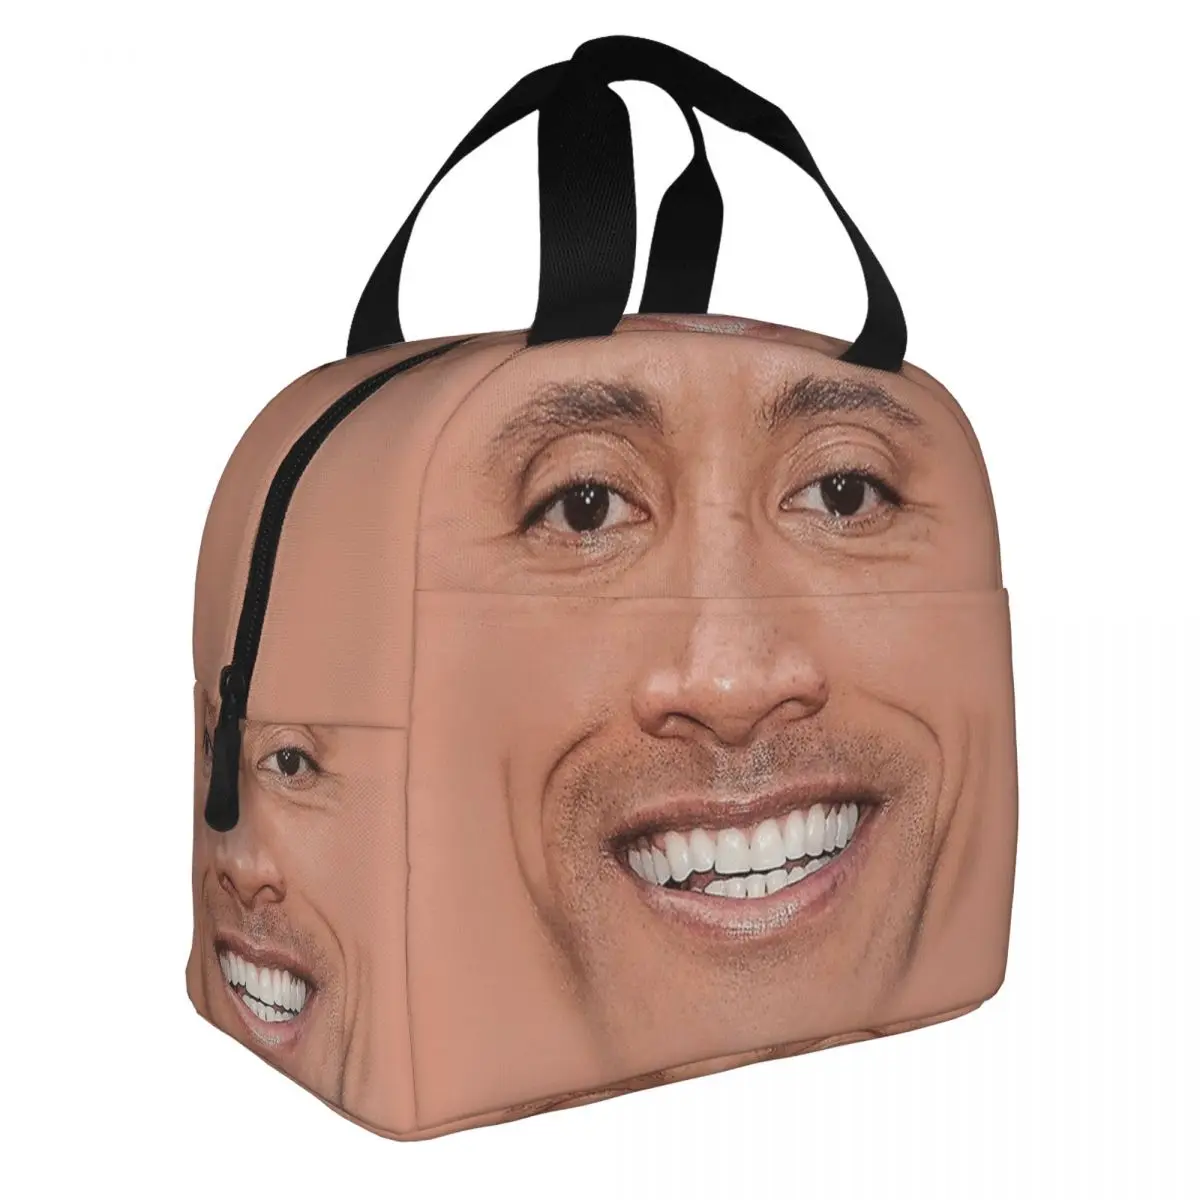 The Rock Face Lunch Bento Bags Portable Aluminum Foil thickened Thermal Cloth Lunch Bag for Women Men Boy